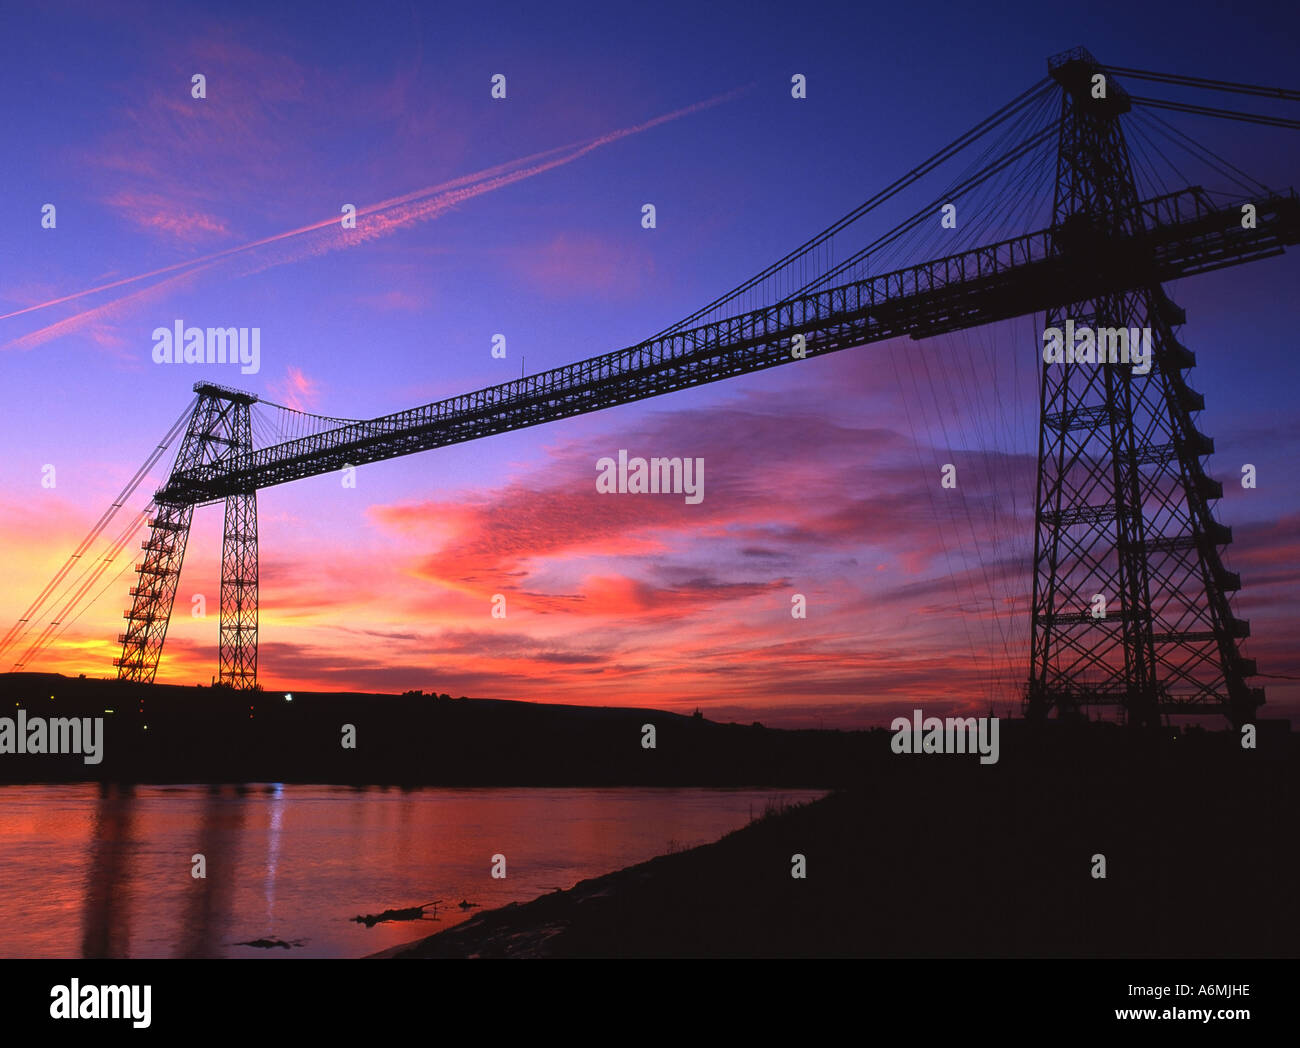 Transporter Bridge Newport Gwent Monmouthshire Sunset silhouette South Wales UK Banque D'Images